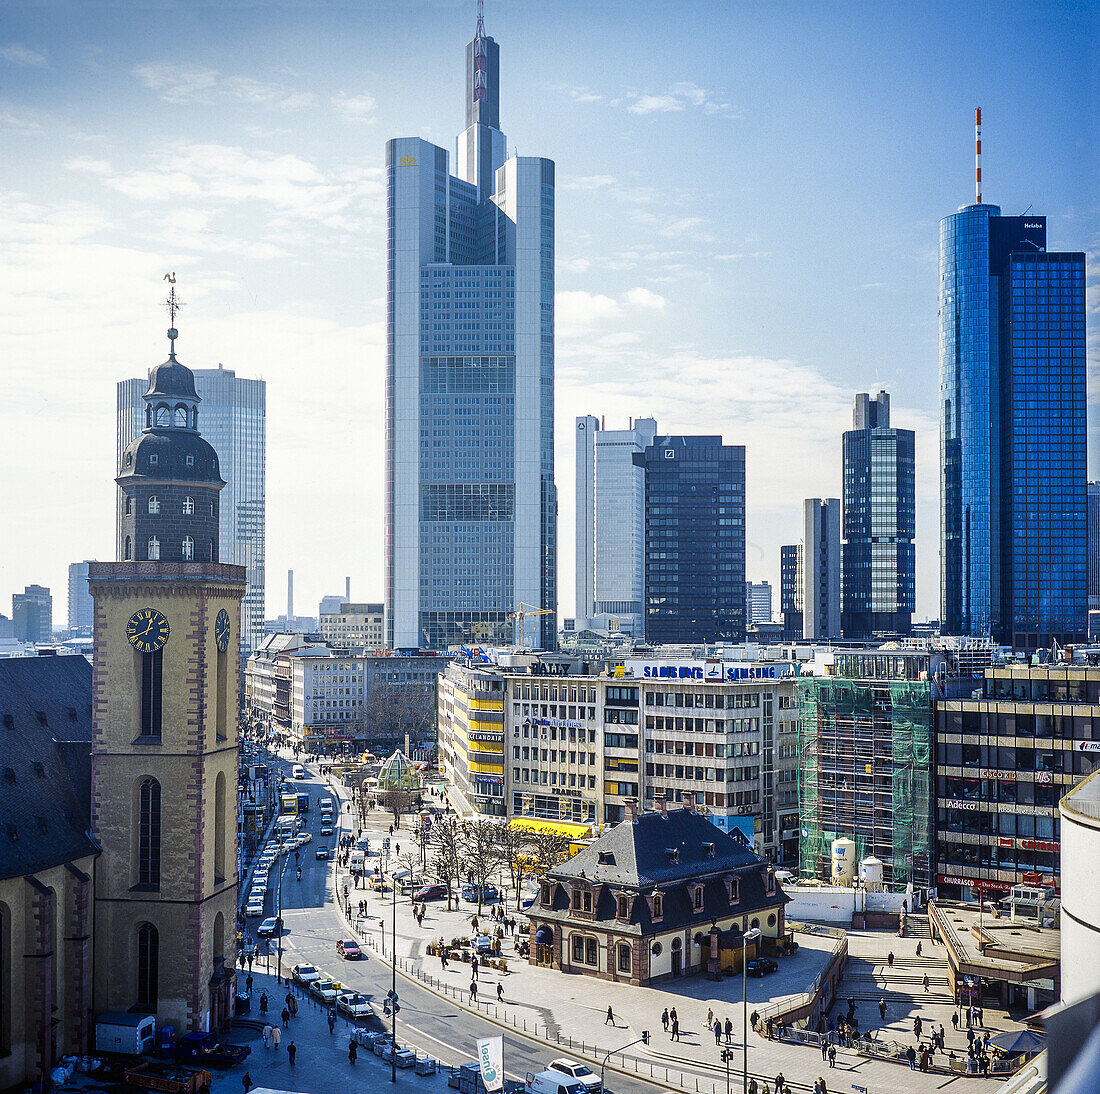 An der Hauptwache square and financial district buildings Frankfurt am Main Hesse Germany.